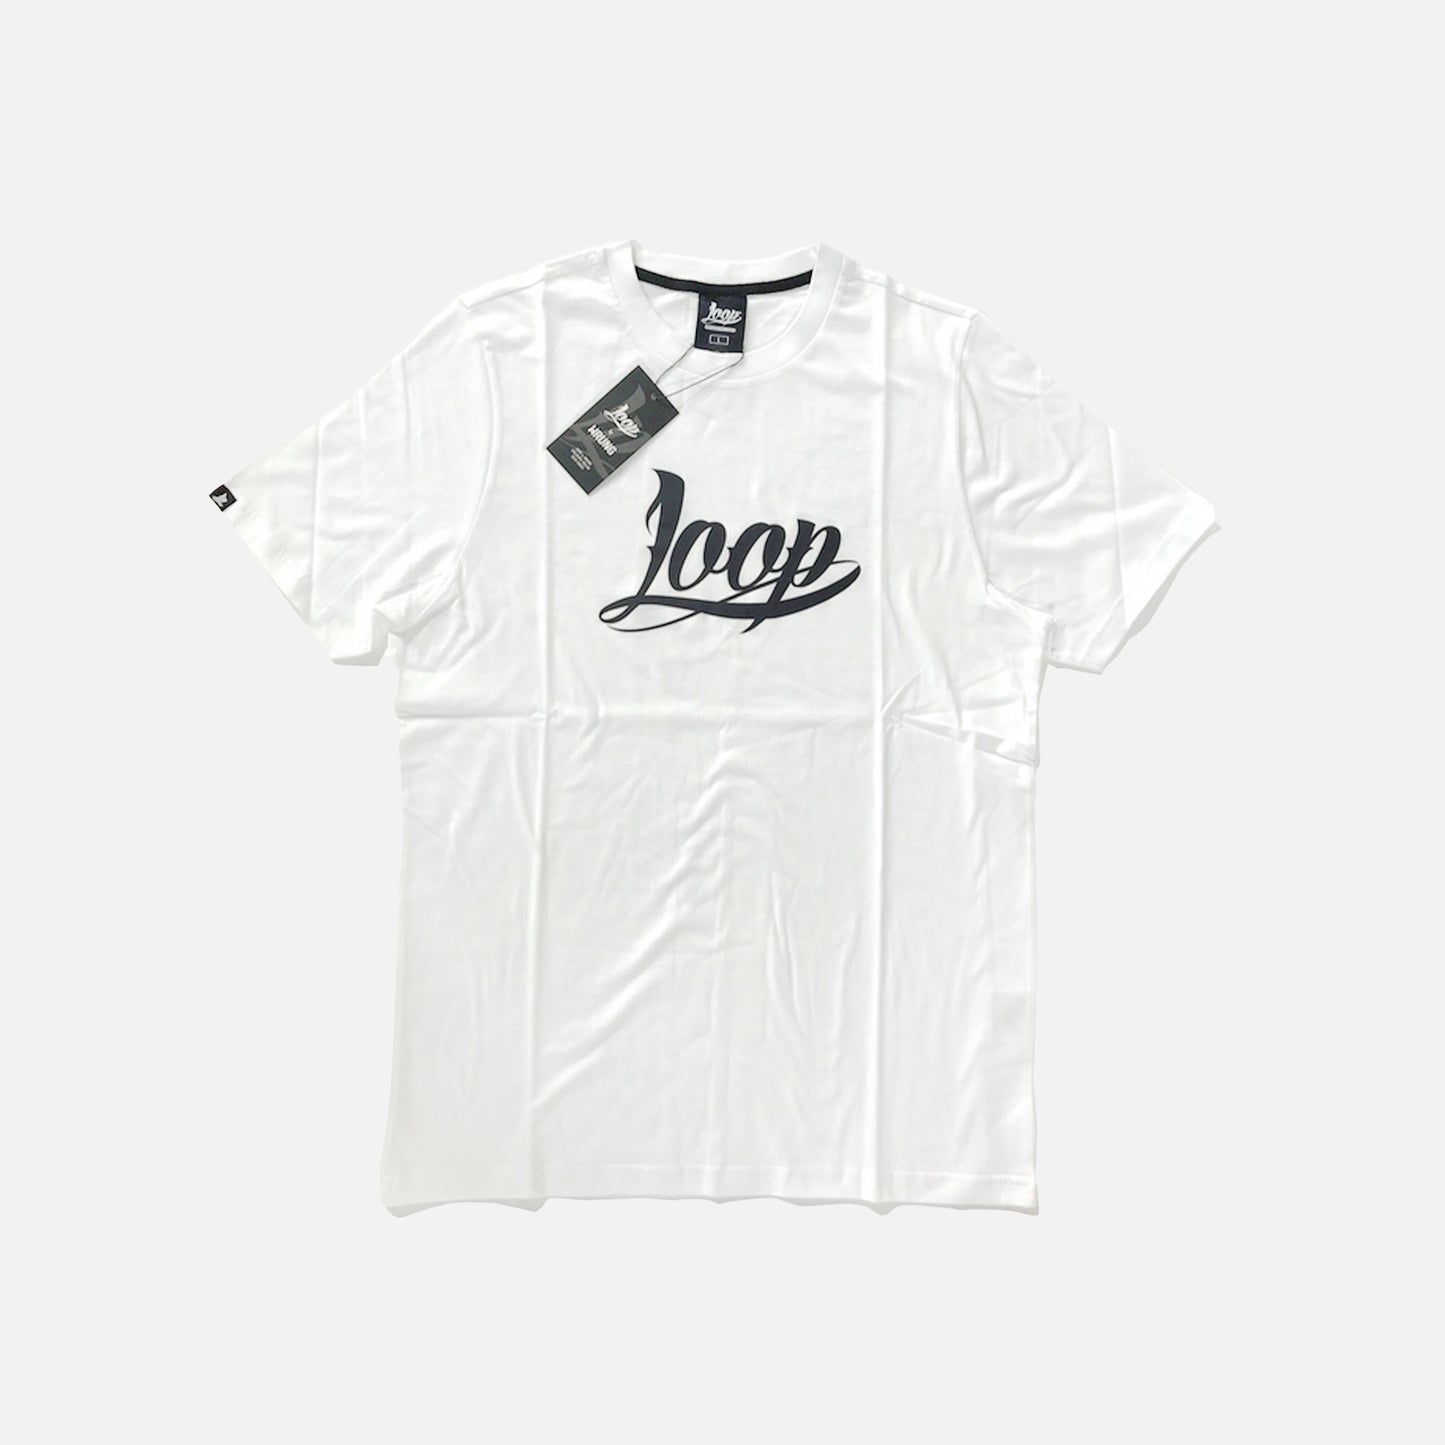 Loop Logo T-shirt White Designed By Wrung for Loopcolours